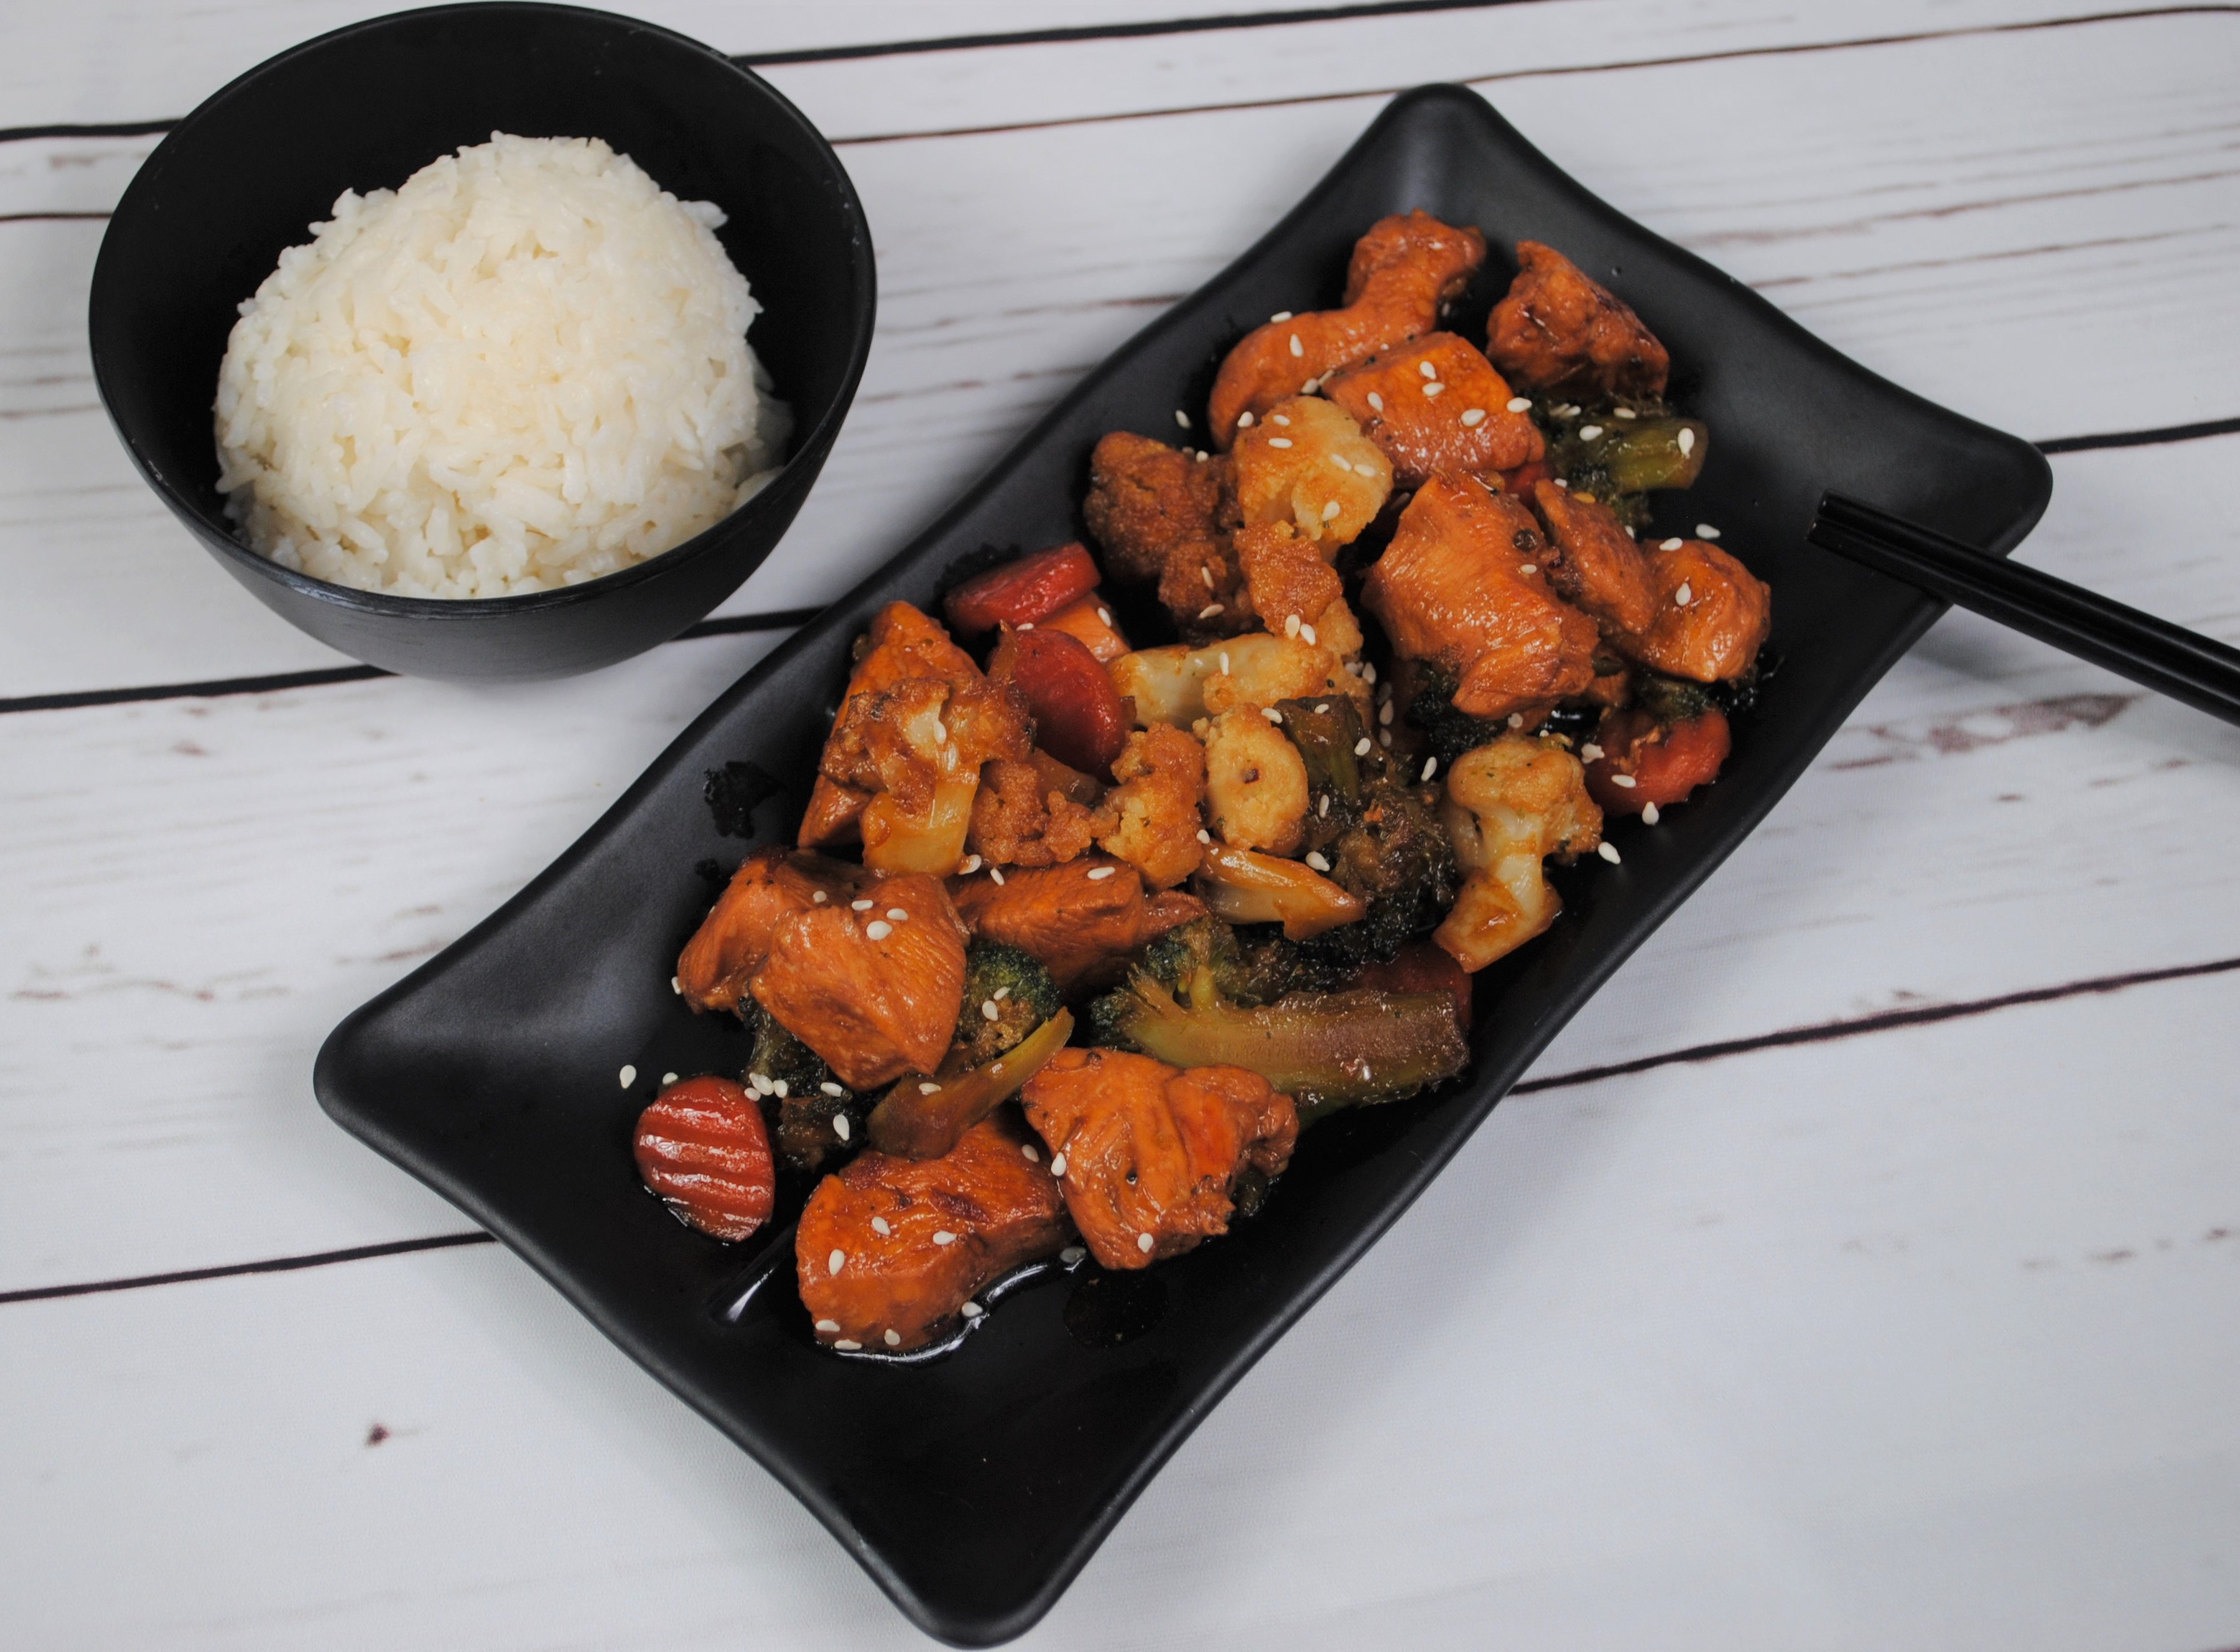 Teriyaki Chicken with vegetables and steamed white rice